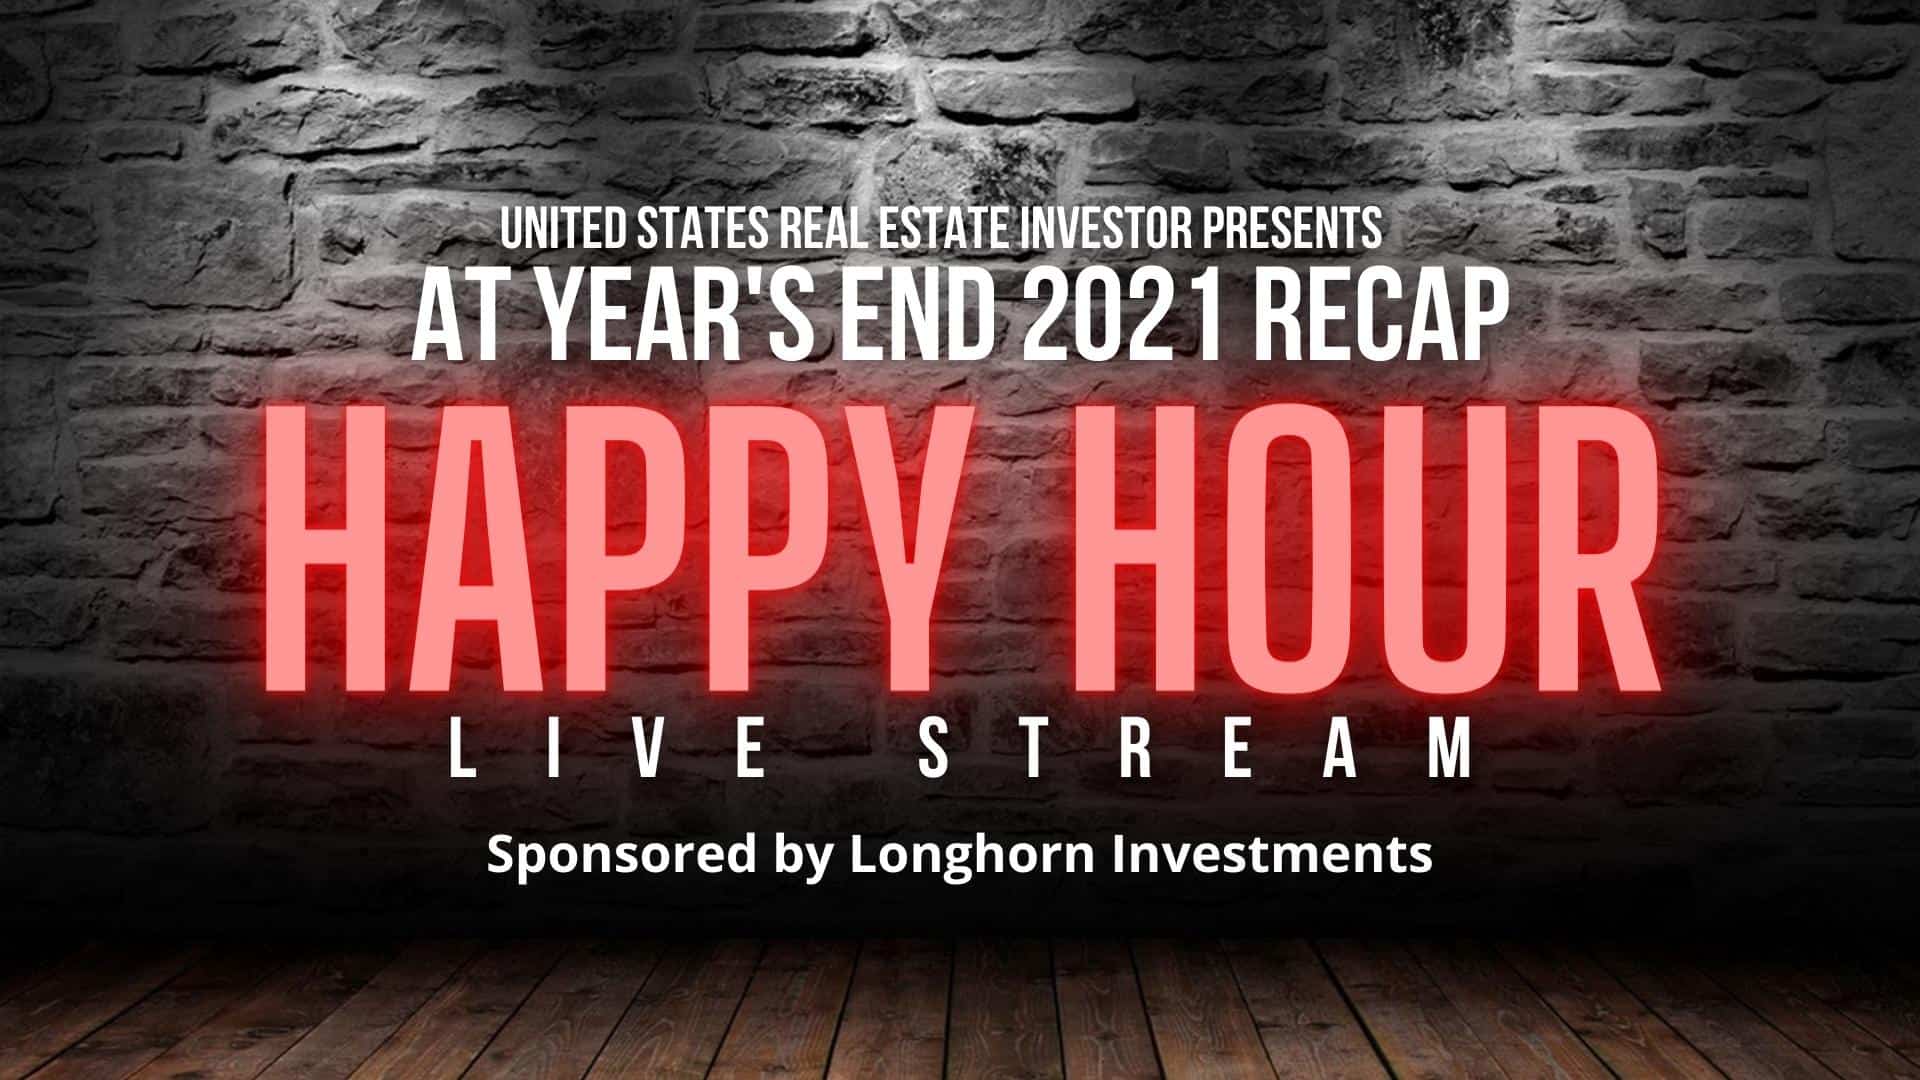 United States Real Estate Investor - Real estate investing media - At Year's End 2021 Happy Hour Live Stream